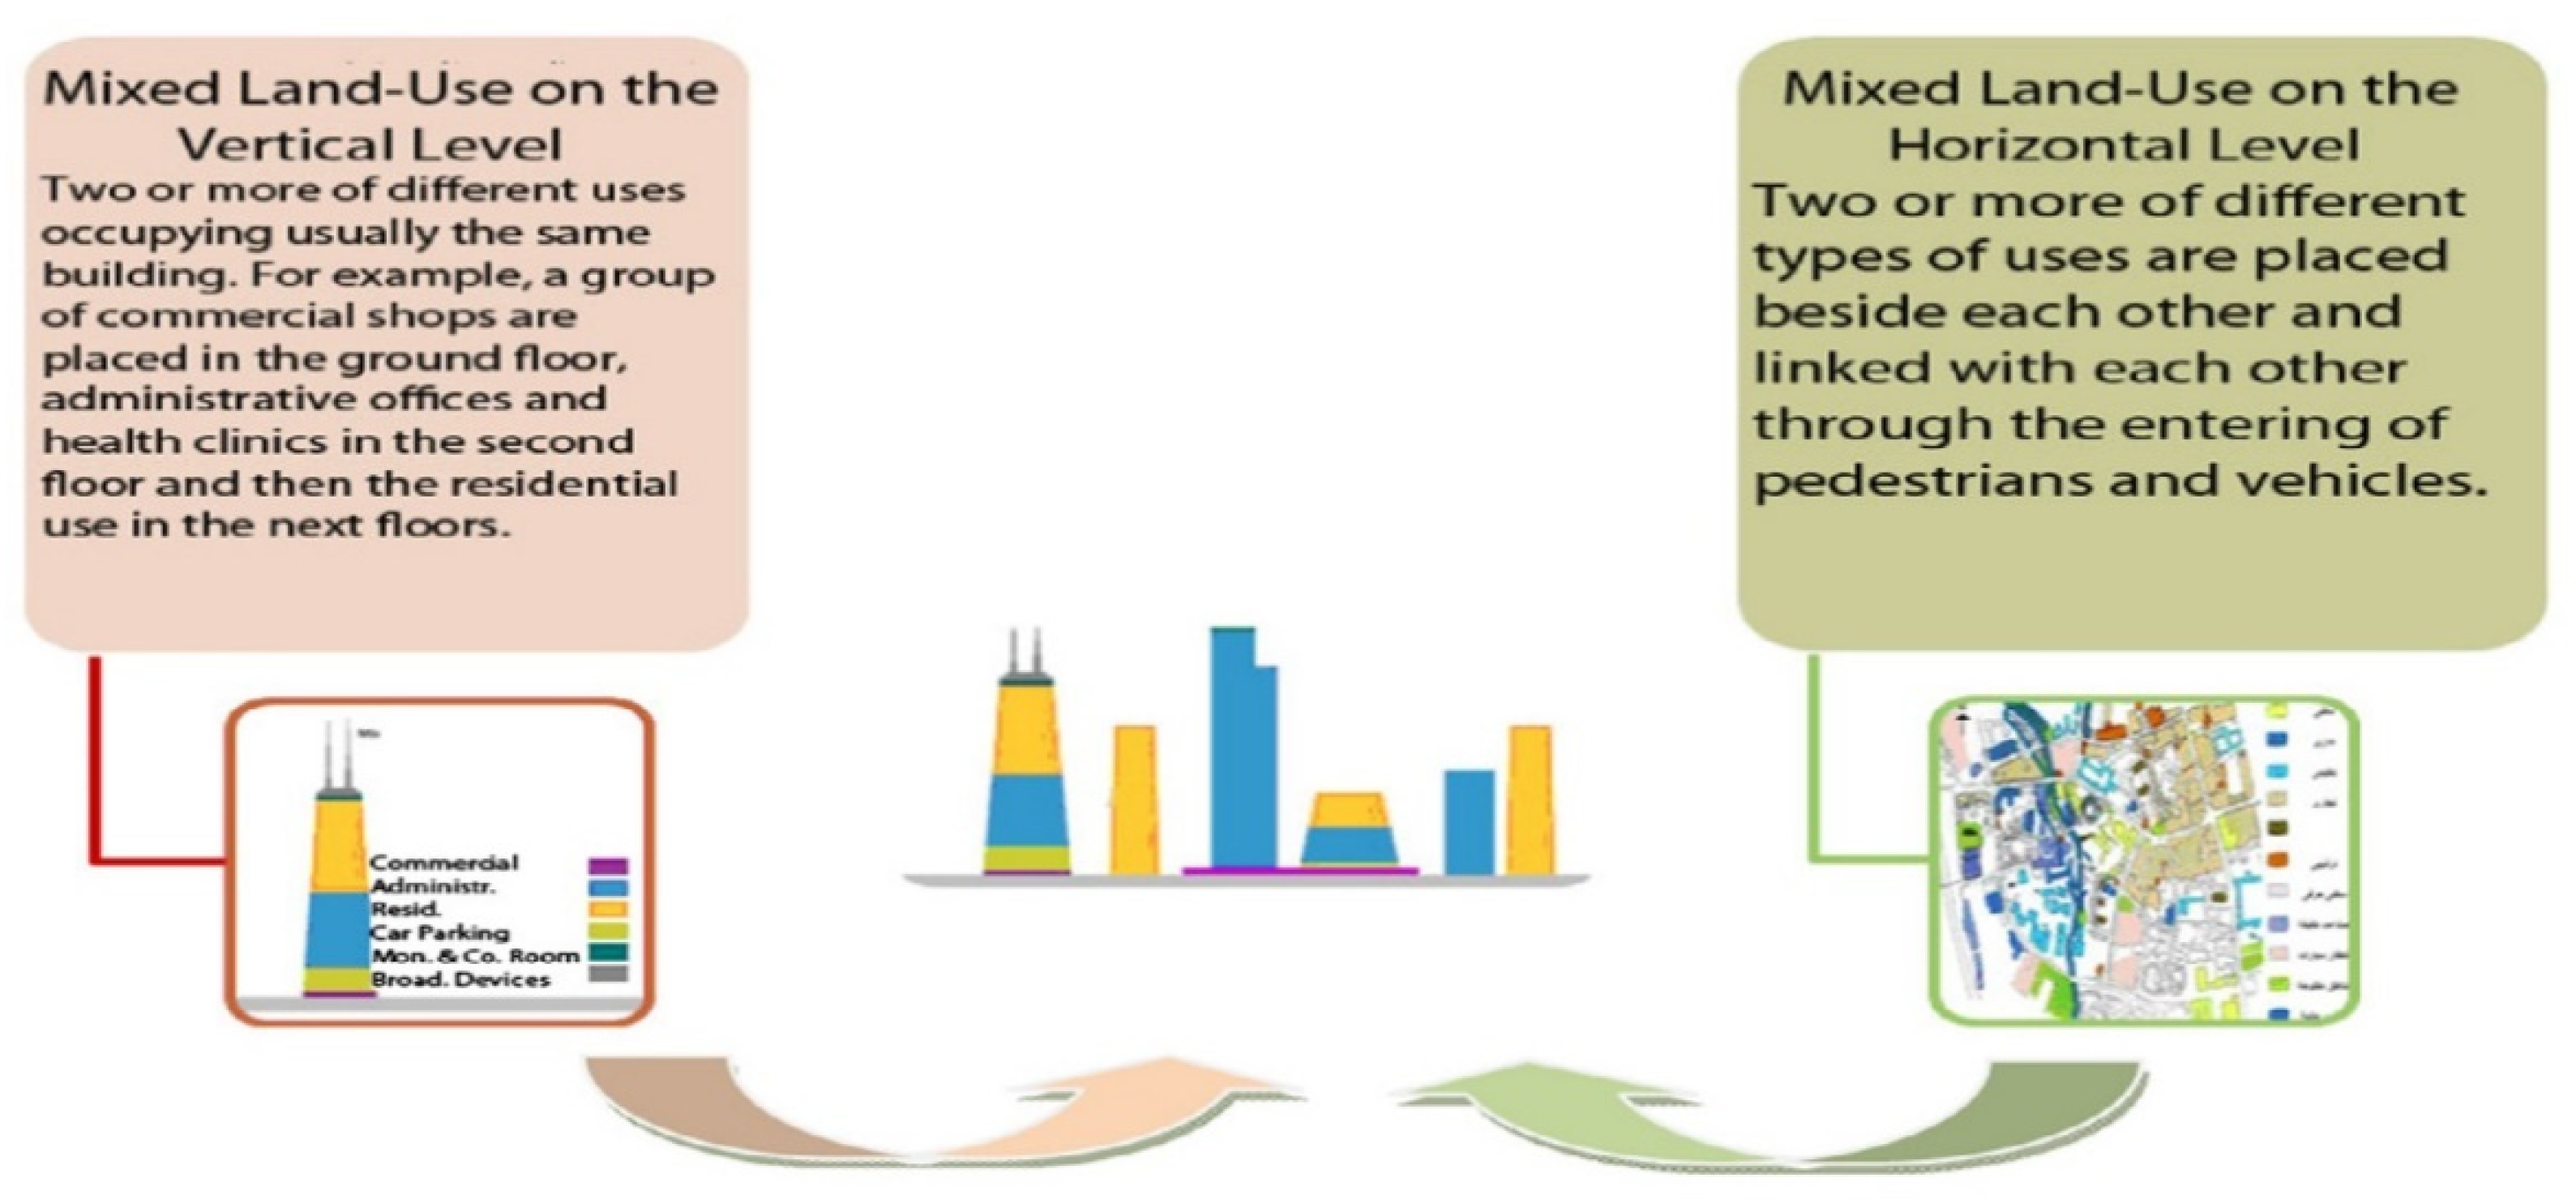 The mixed effects of mixed land use - Urban Economics